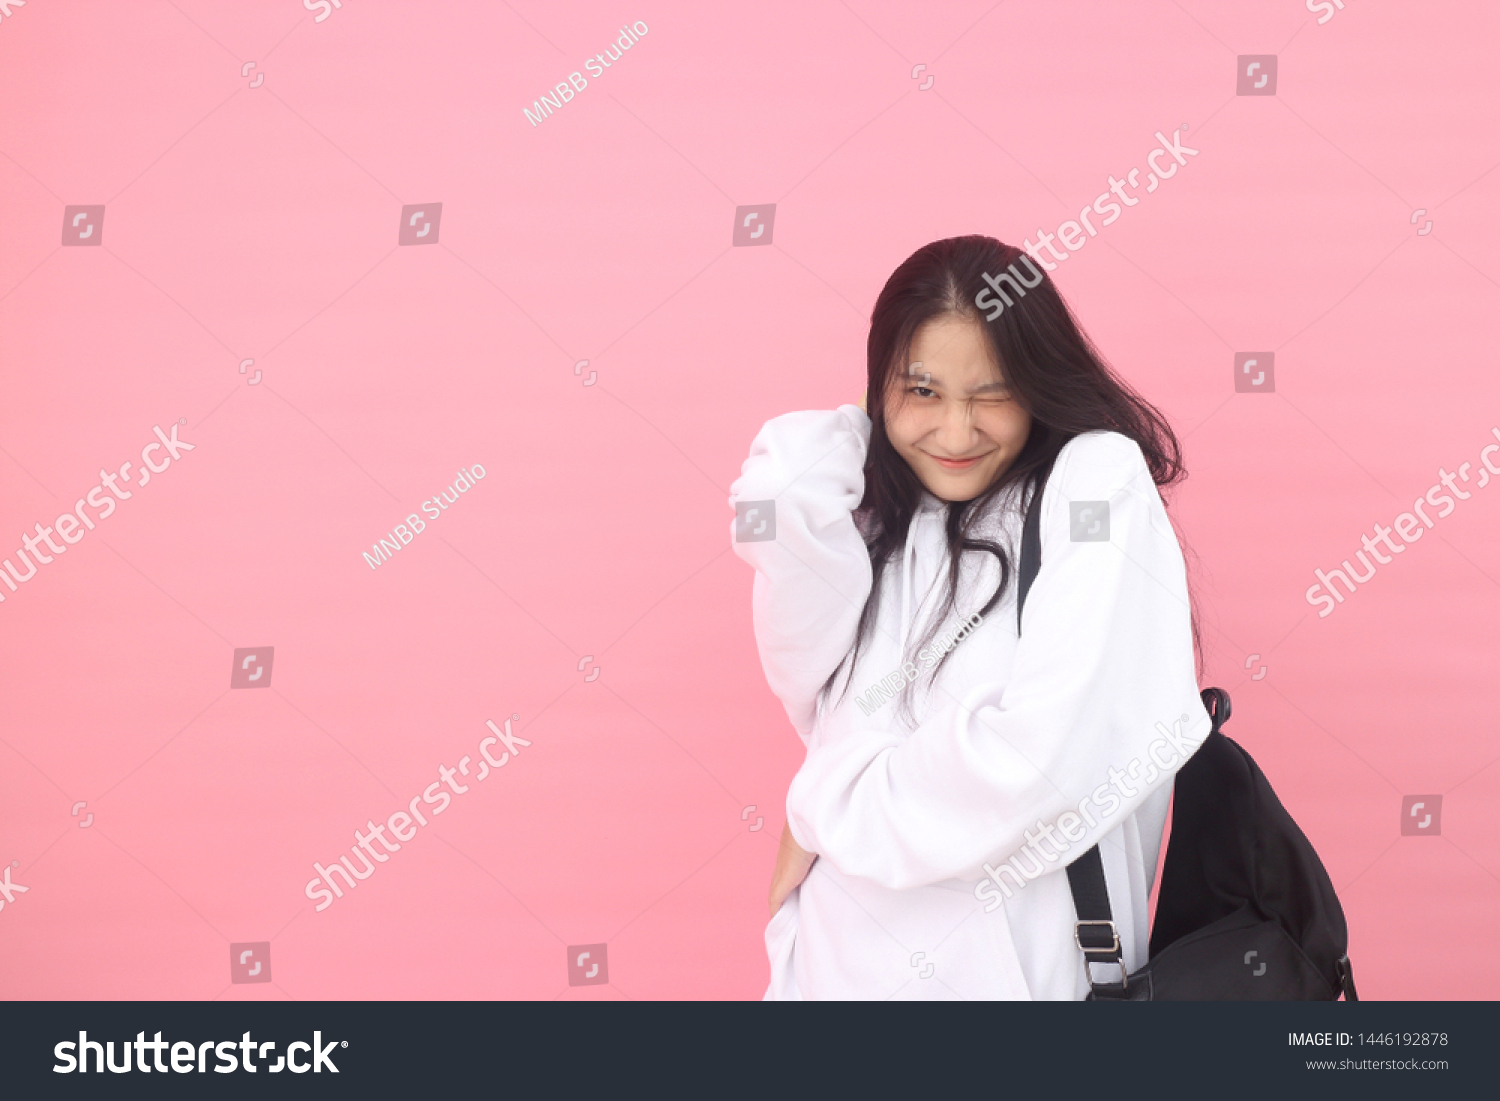 Isolated shot of pretty adult with long hair, broad smile, wears casual outfit, being entertained by friend during party, tilts head and looks with joy, dressed casually, Beautiful Asian models over   #1446192878